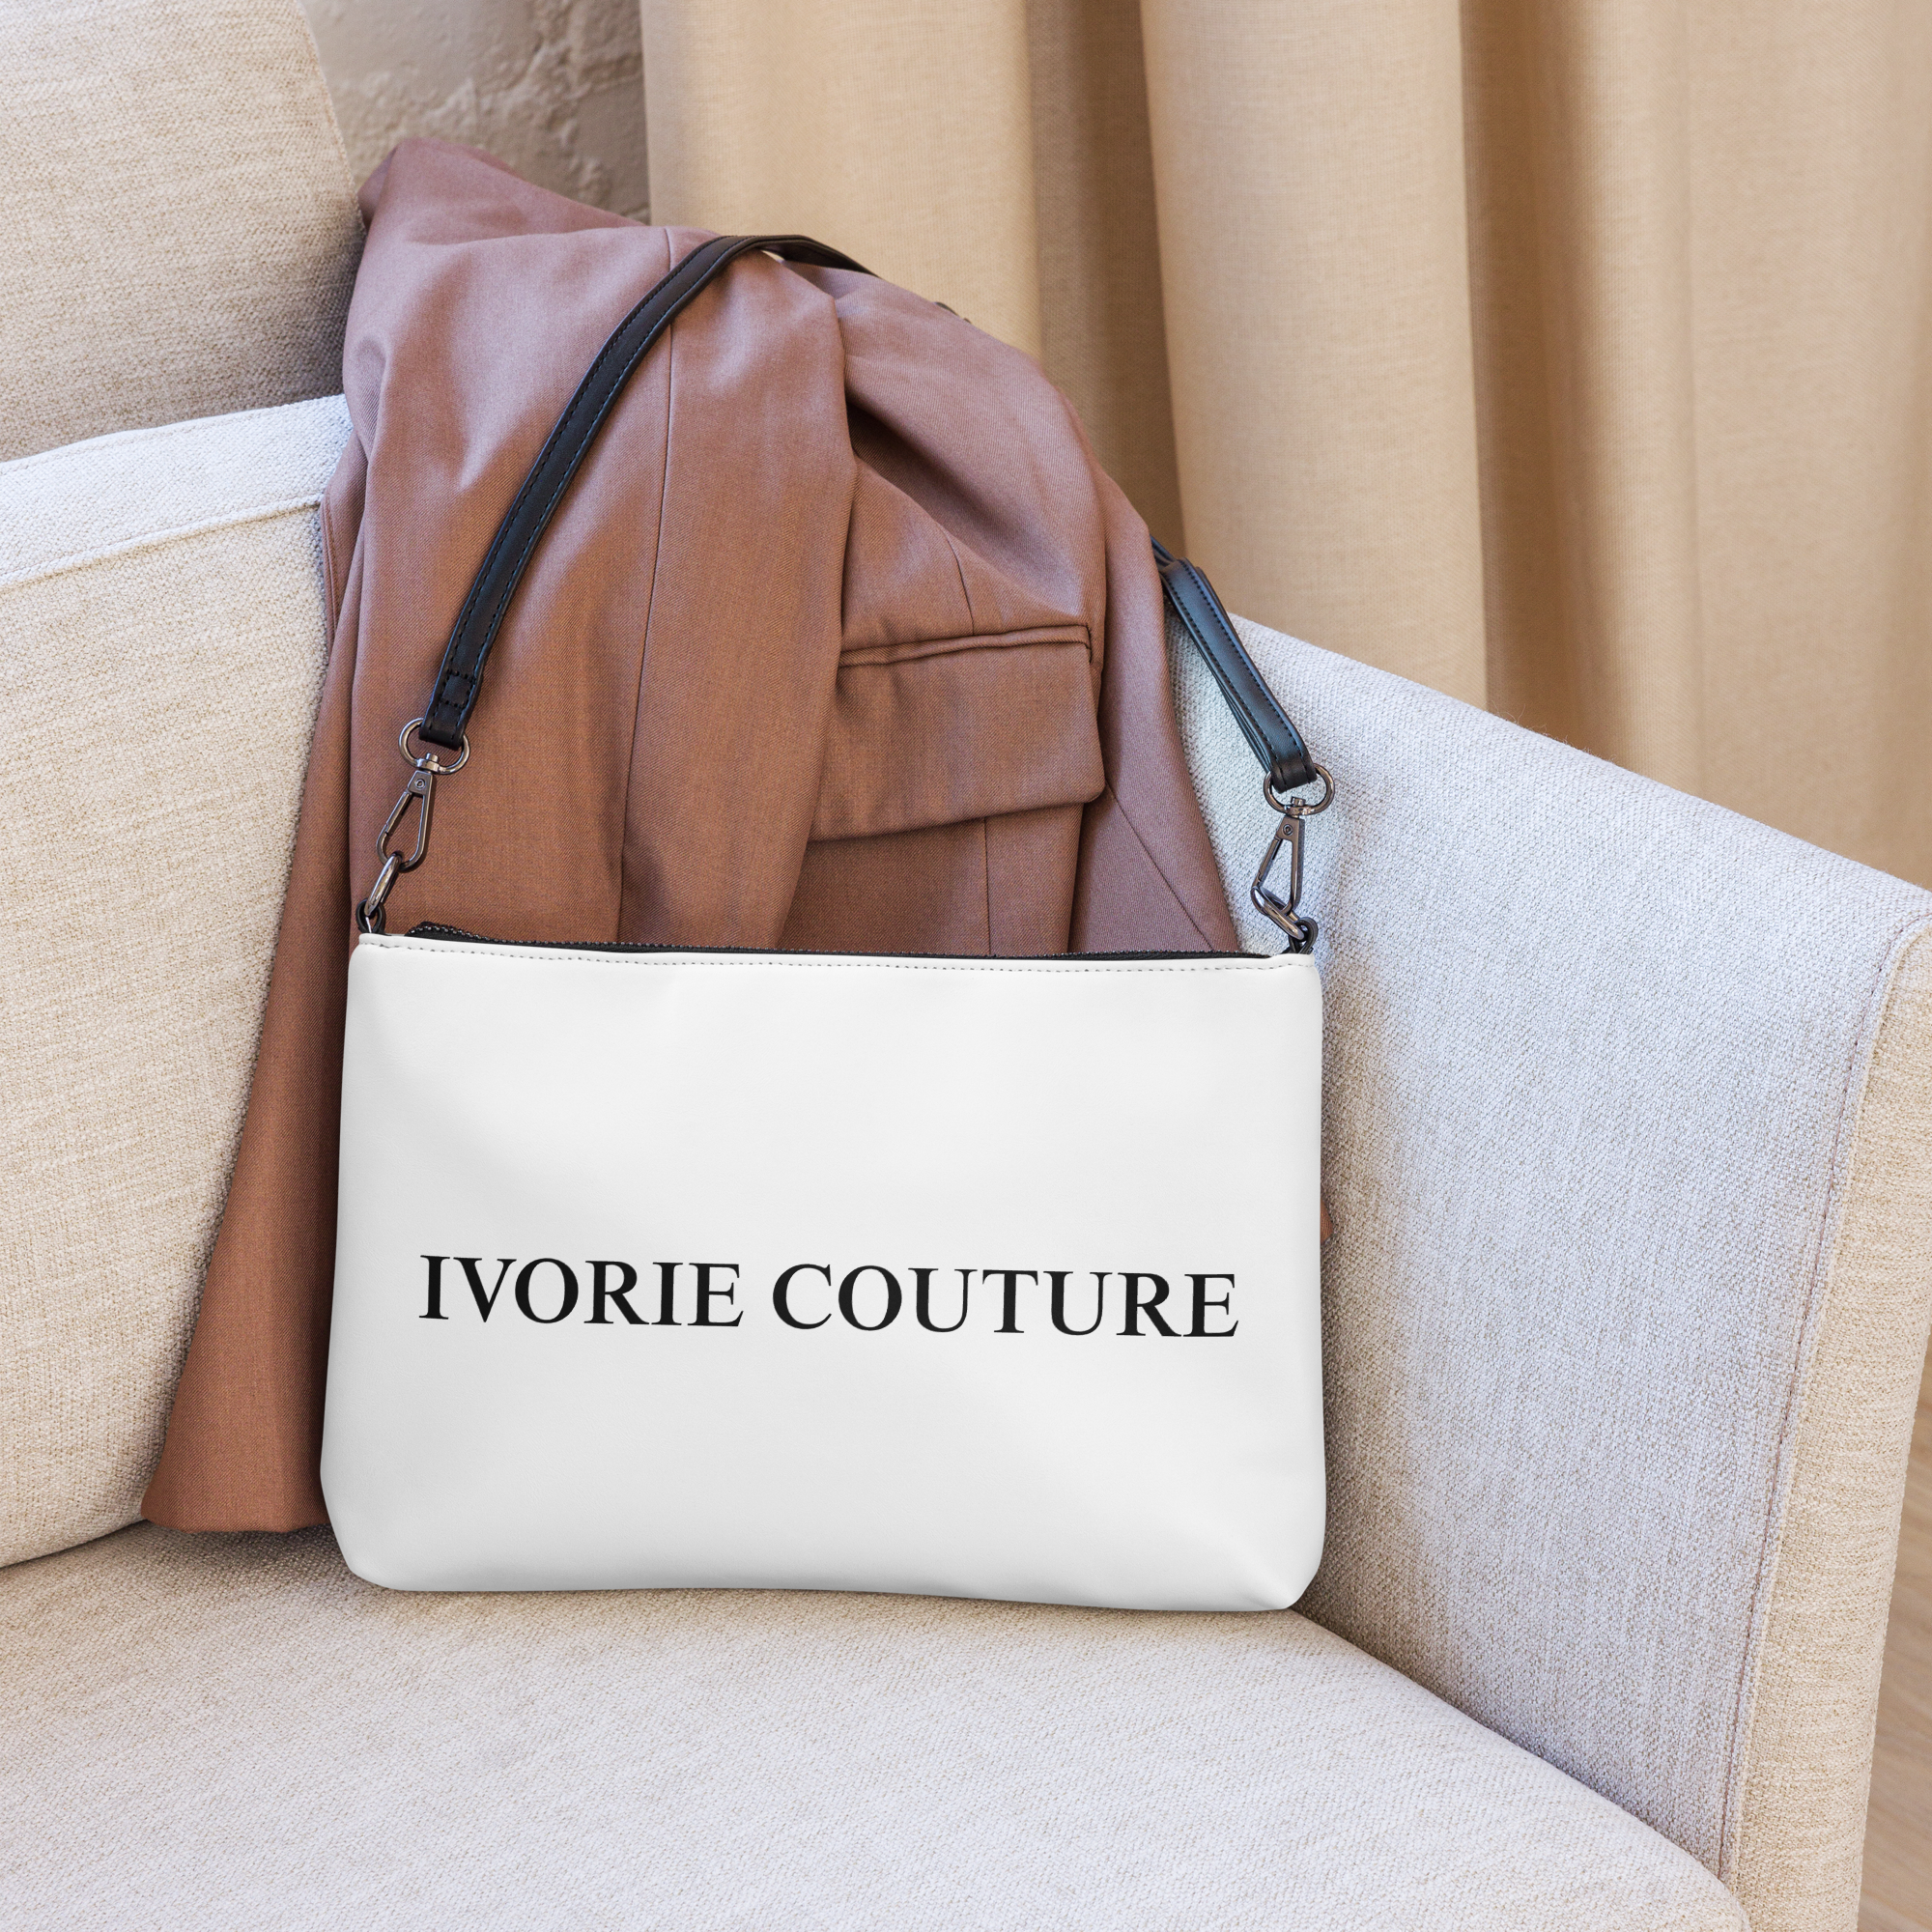 Ivorie Couture Blanca Crossbody bag purse White on couch with clothing article